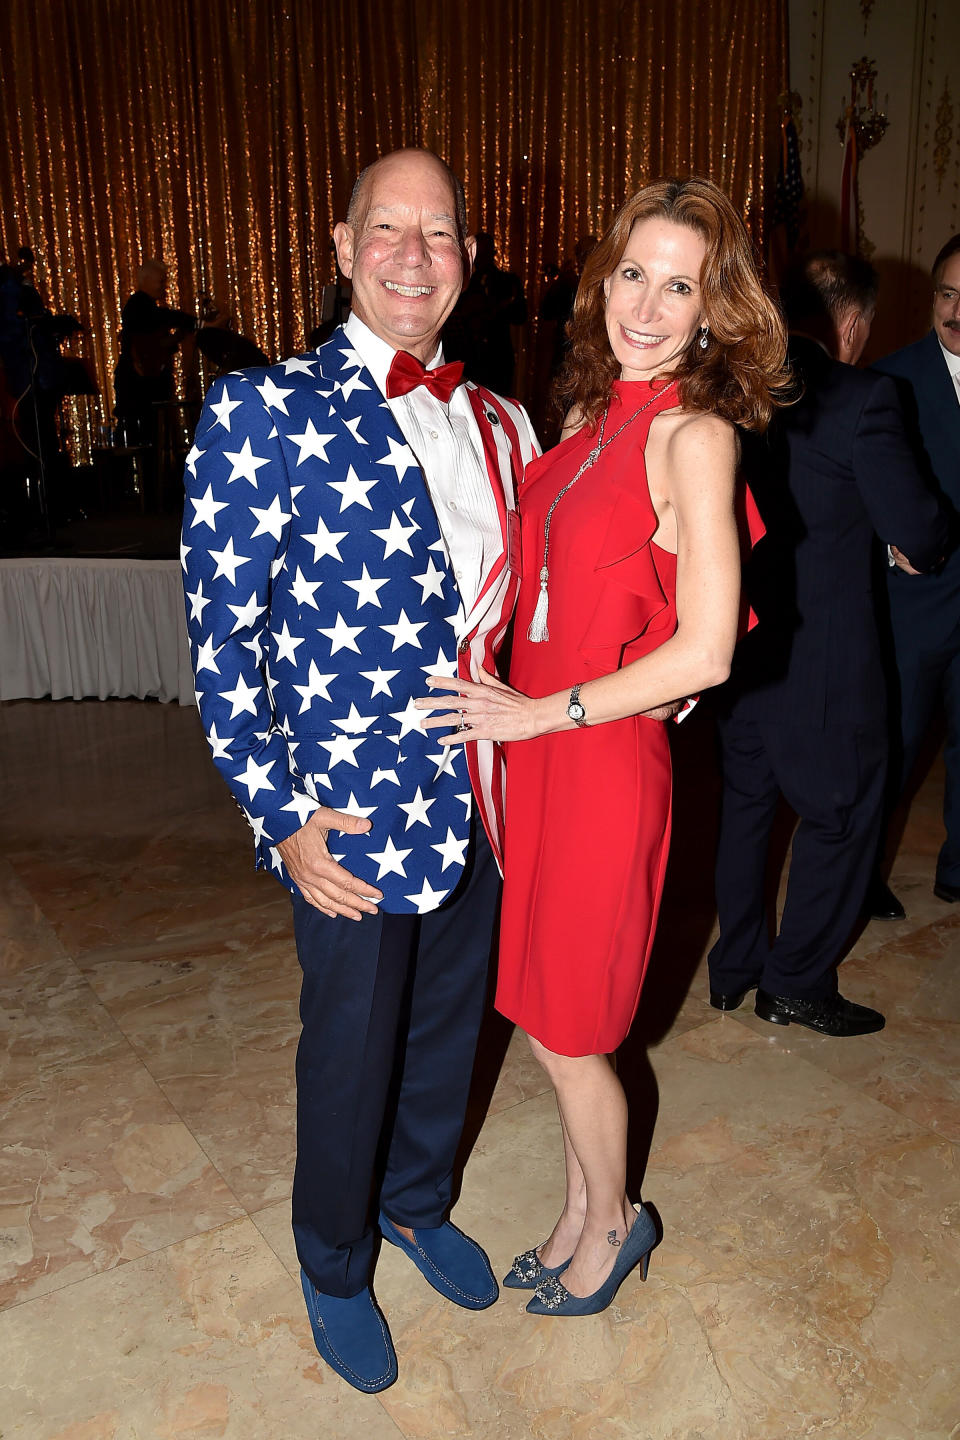 Steven Alembik and Dawn Silver attend President Trump's one-year anniversary celebration with over 800 guests at Trump's Mar-a-Lago estate in Palm Beach, Florida, on Jan. 18, 2018. (Photo: Patrick McMullan via Getty Images)